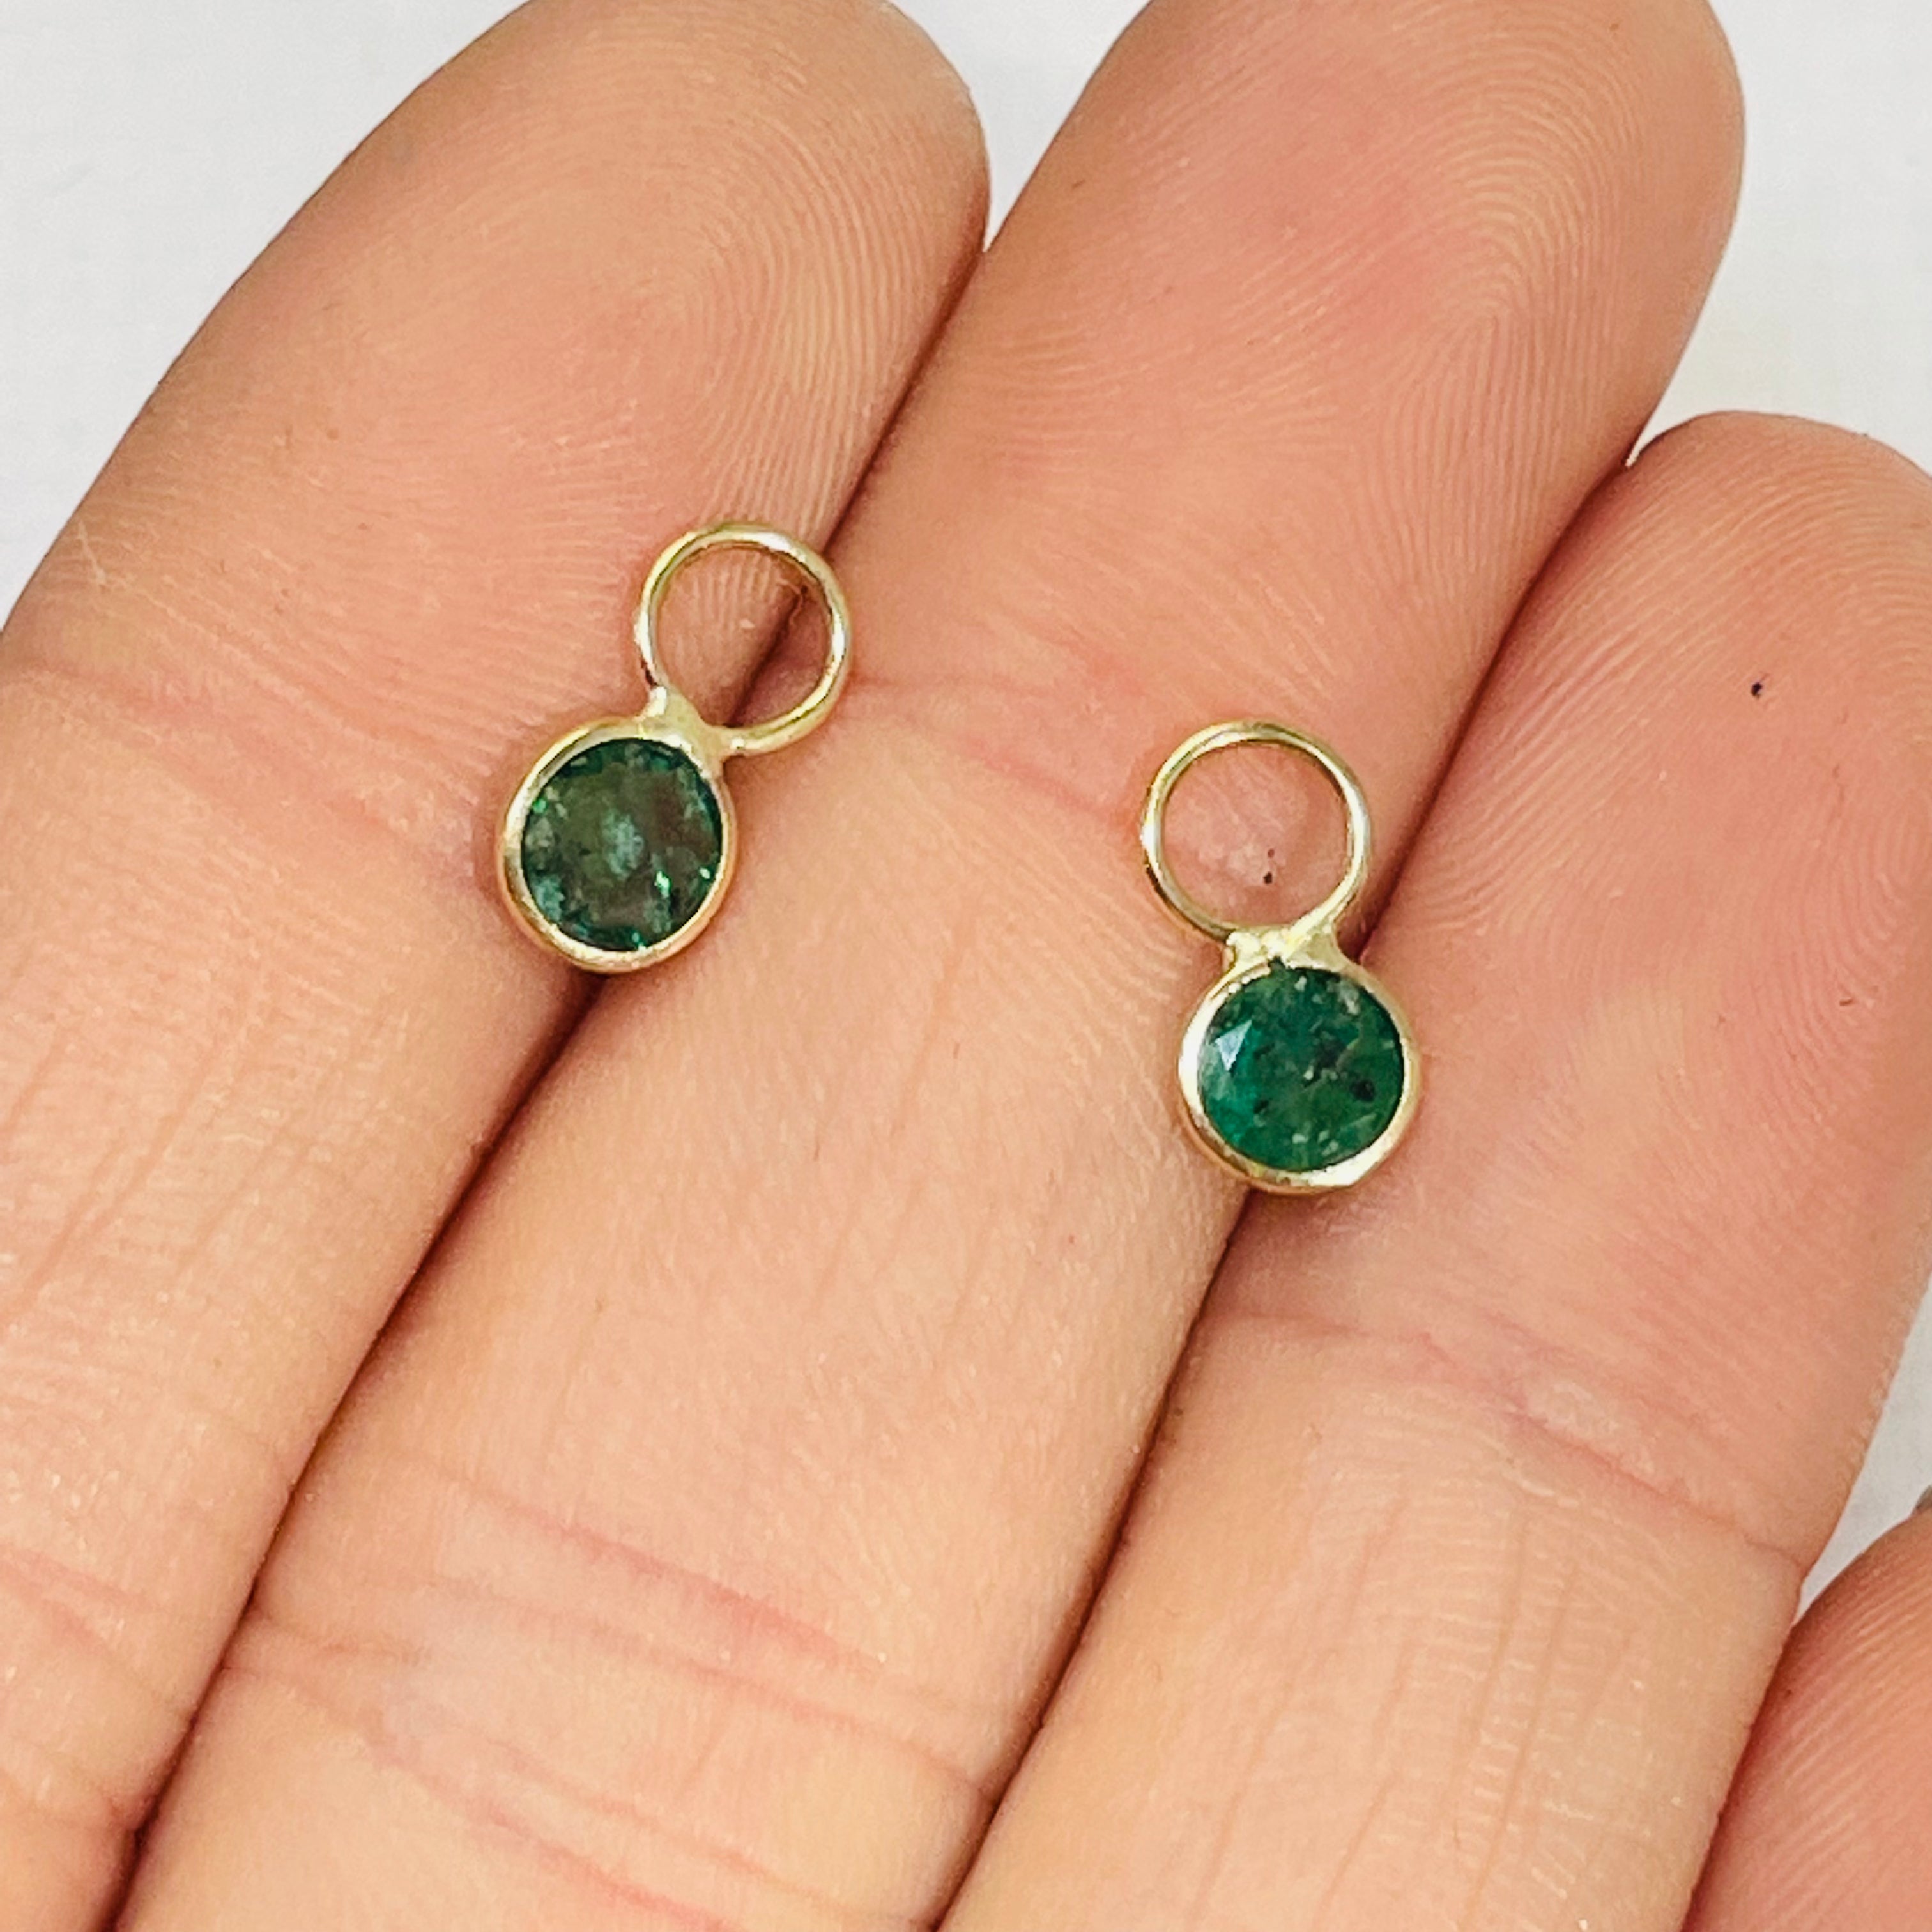 14K Yellow Gold Round Emerald Earring Charm Pair